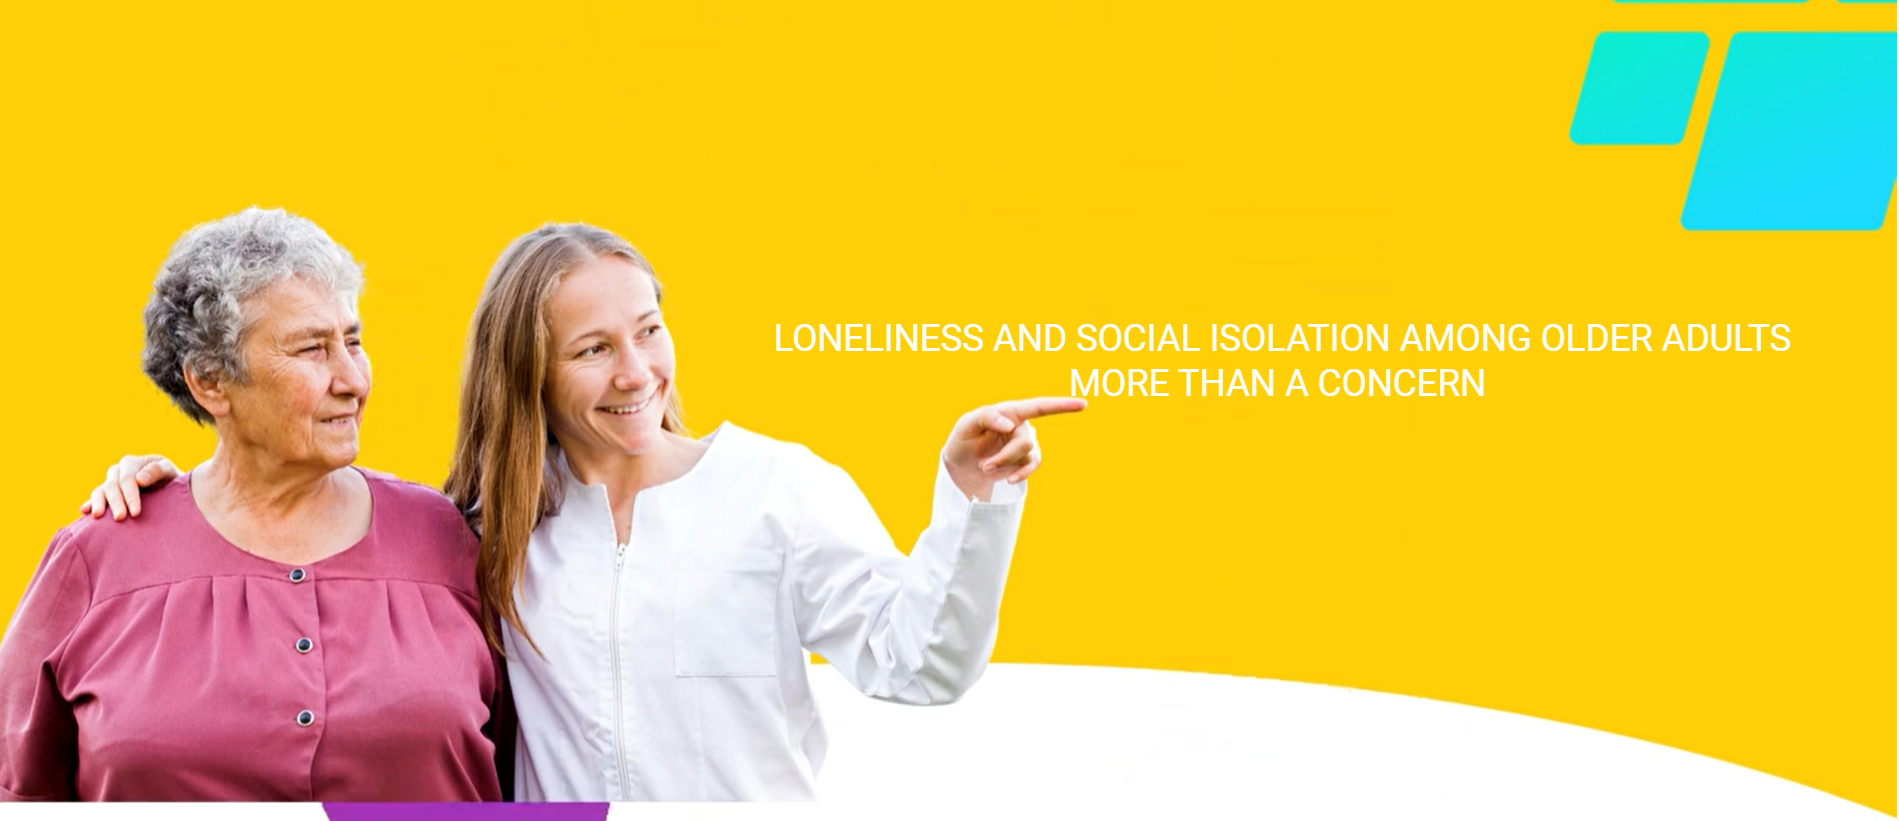 Addressing Loneliness and Social Isolation in Older Adults